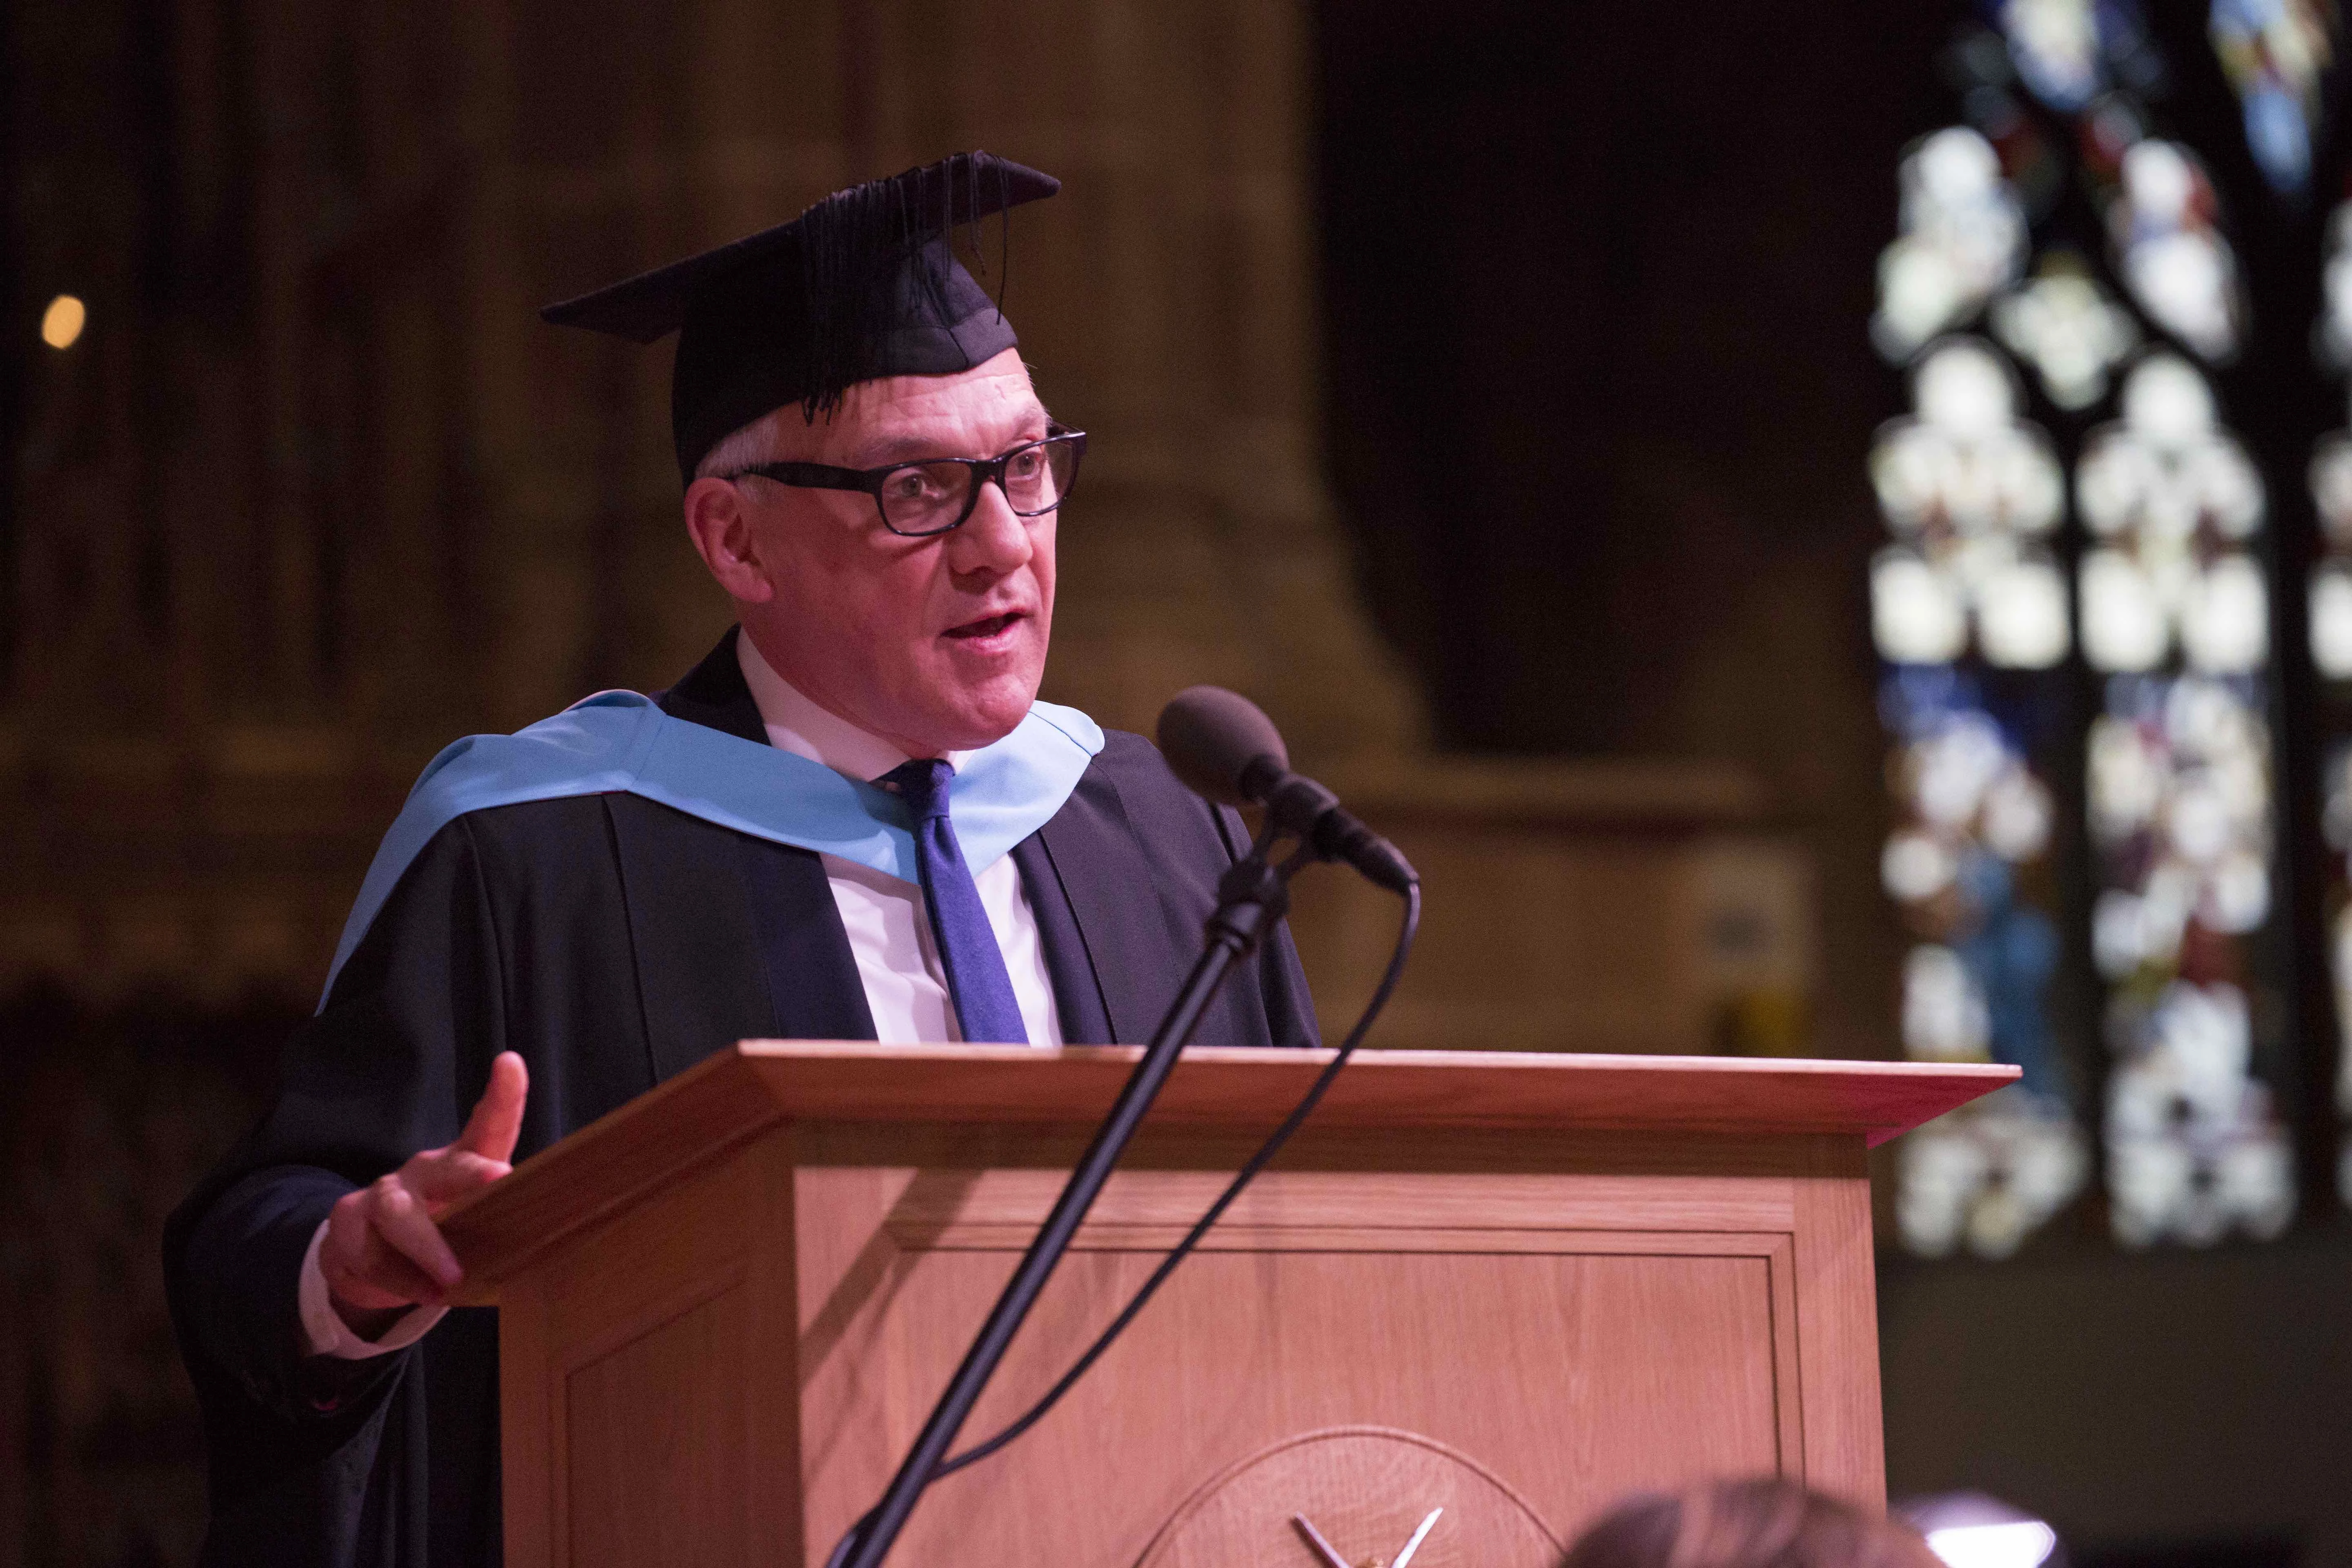 John Greaves receives his honorary MBA from the University of Chester